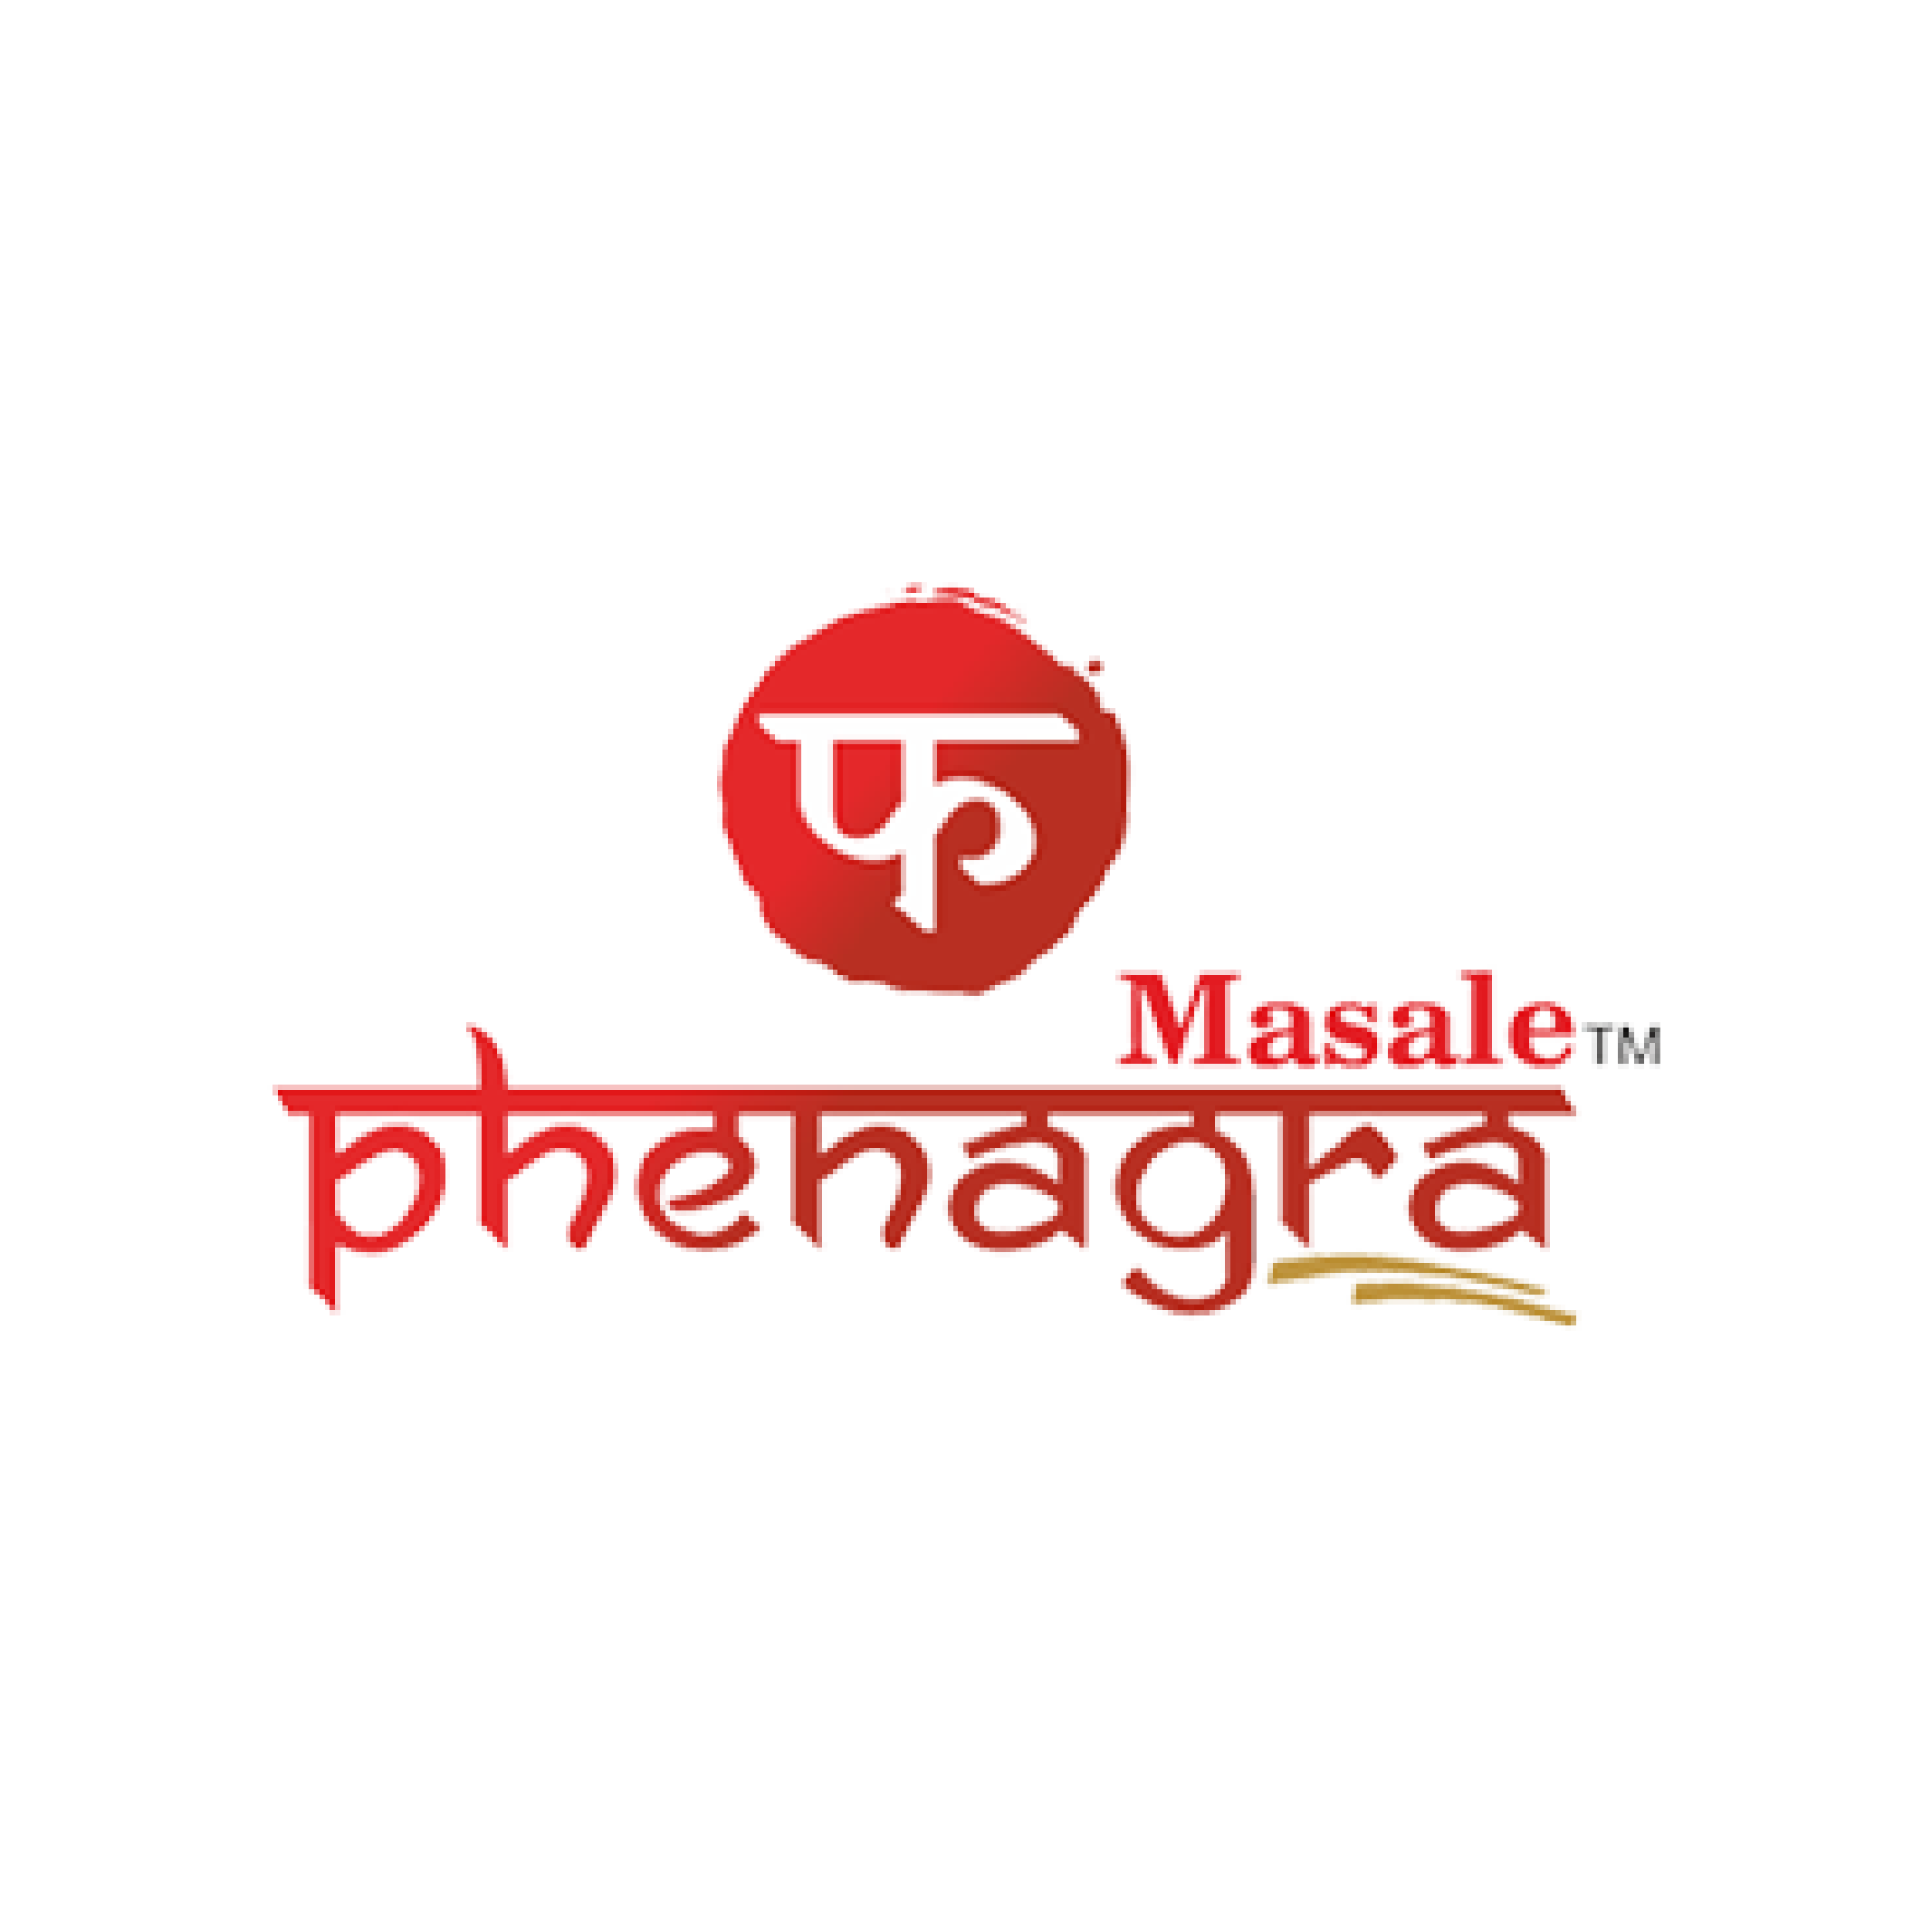 Brand Building Project for Phenagra Masale